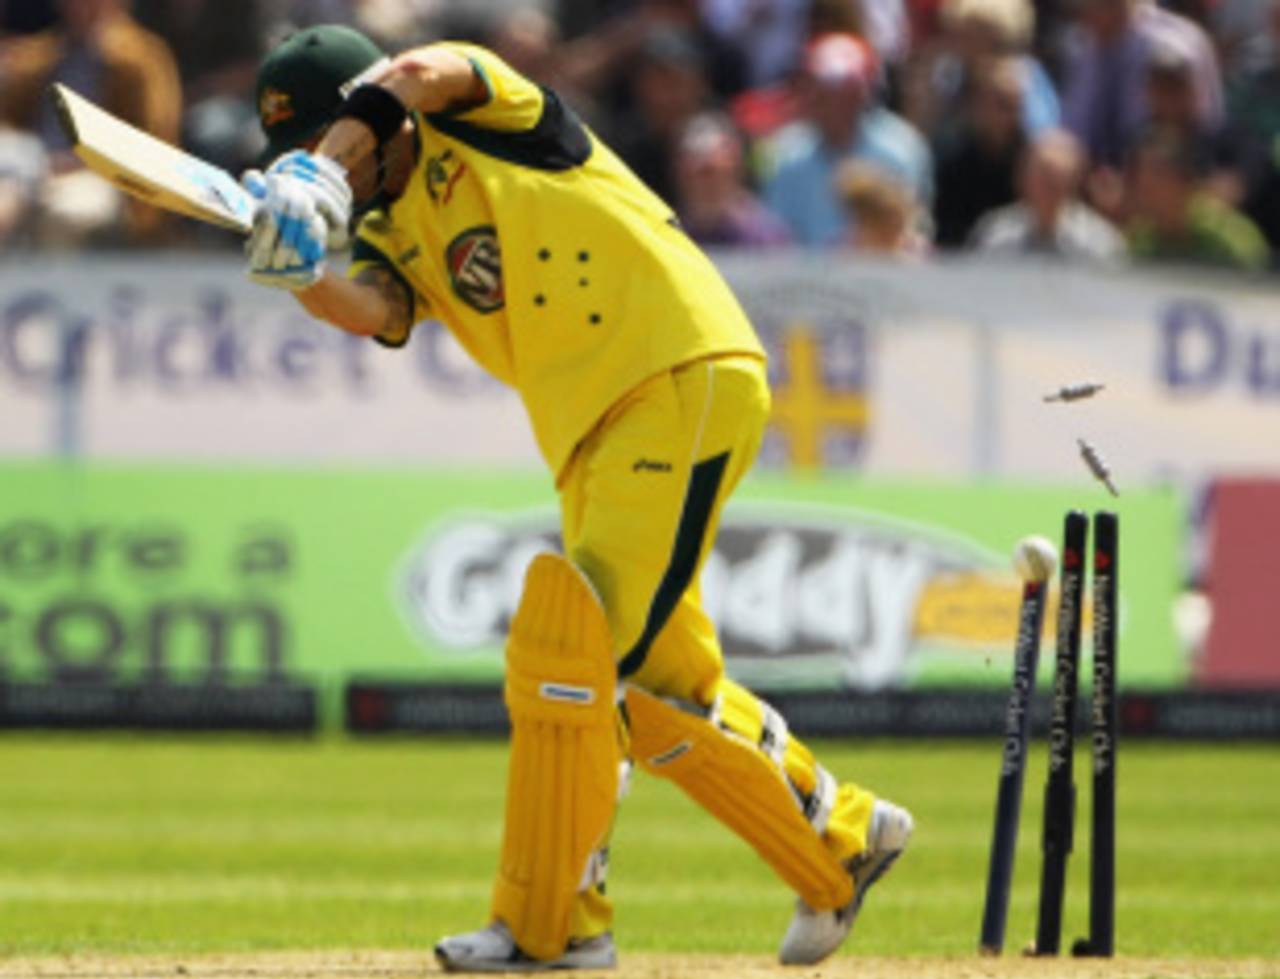 Michael Clarke was bowled as Australia slid further into trouble, England v Australia, 4th ODI, Chester-le-Street, July 7, 2012